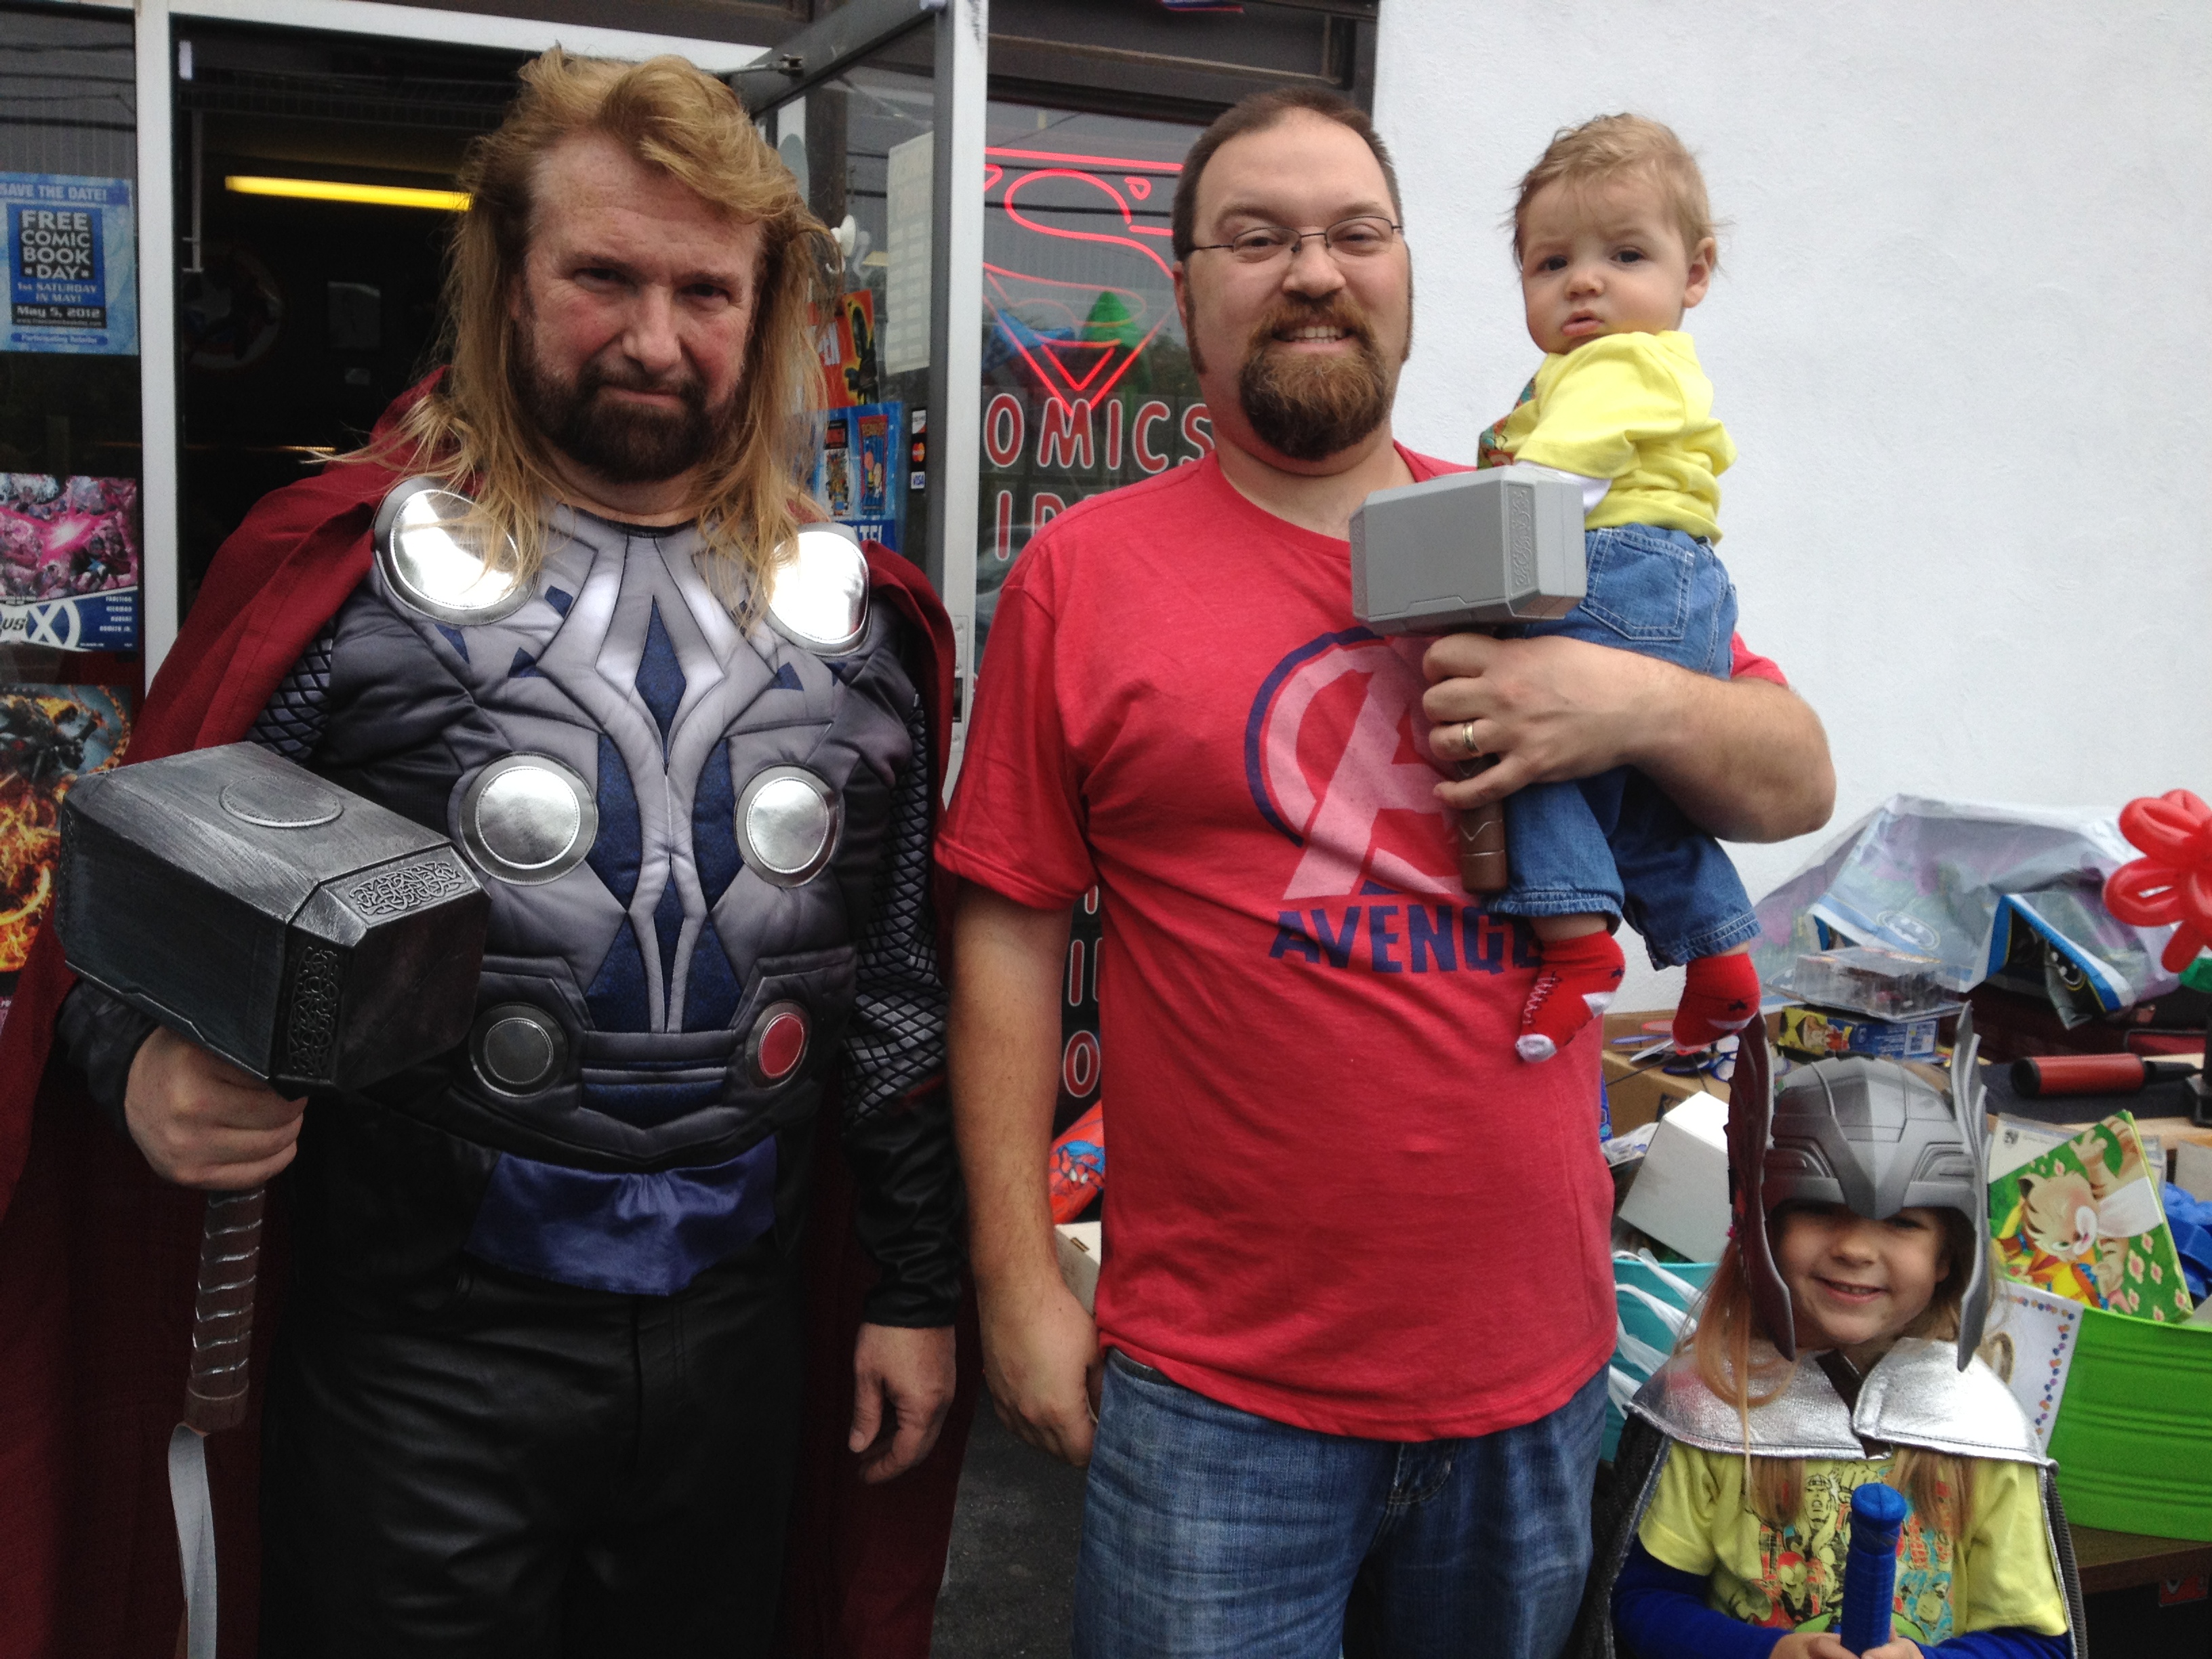 Meeting Thor at Free Comic Book Day